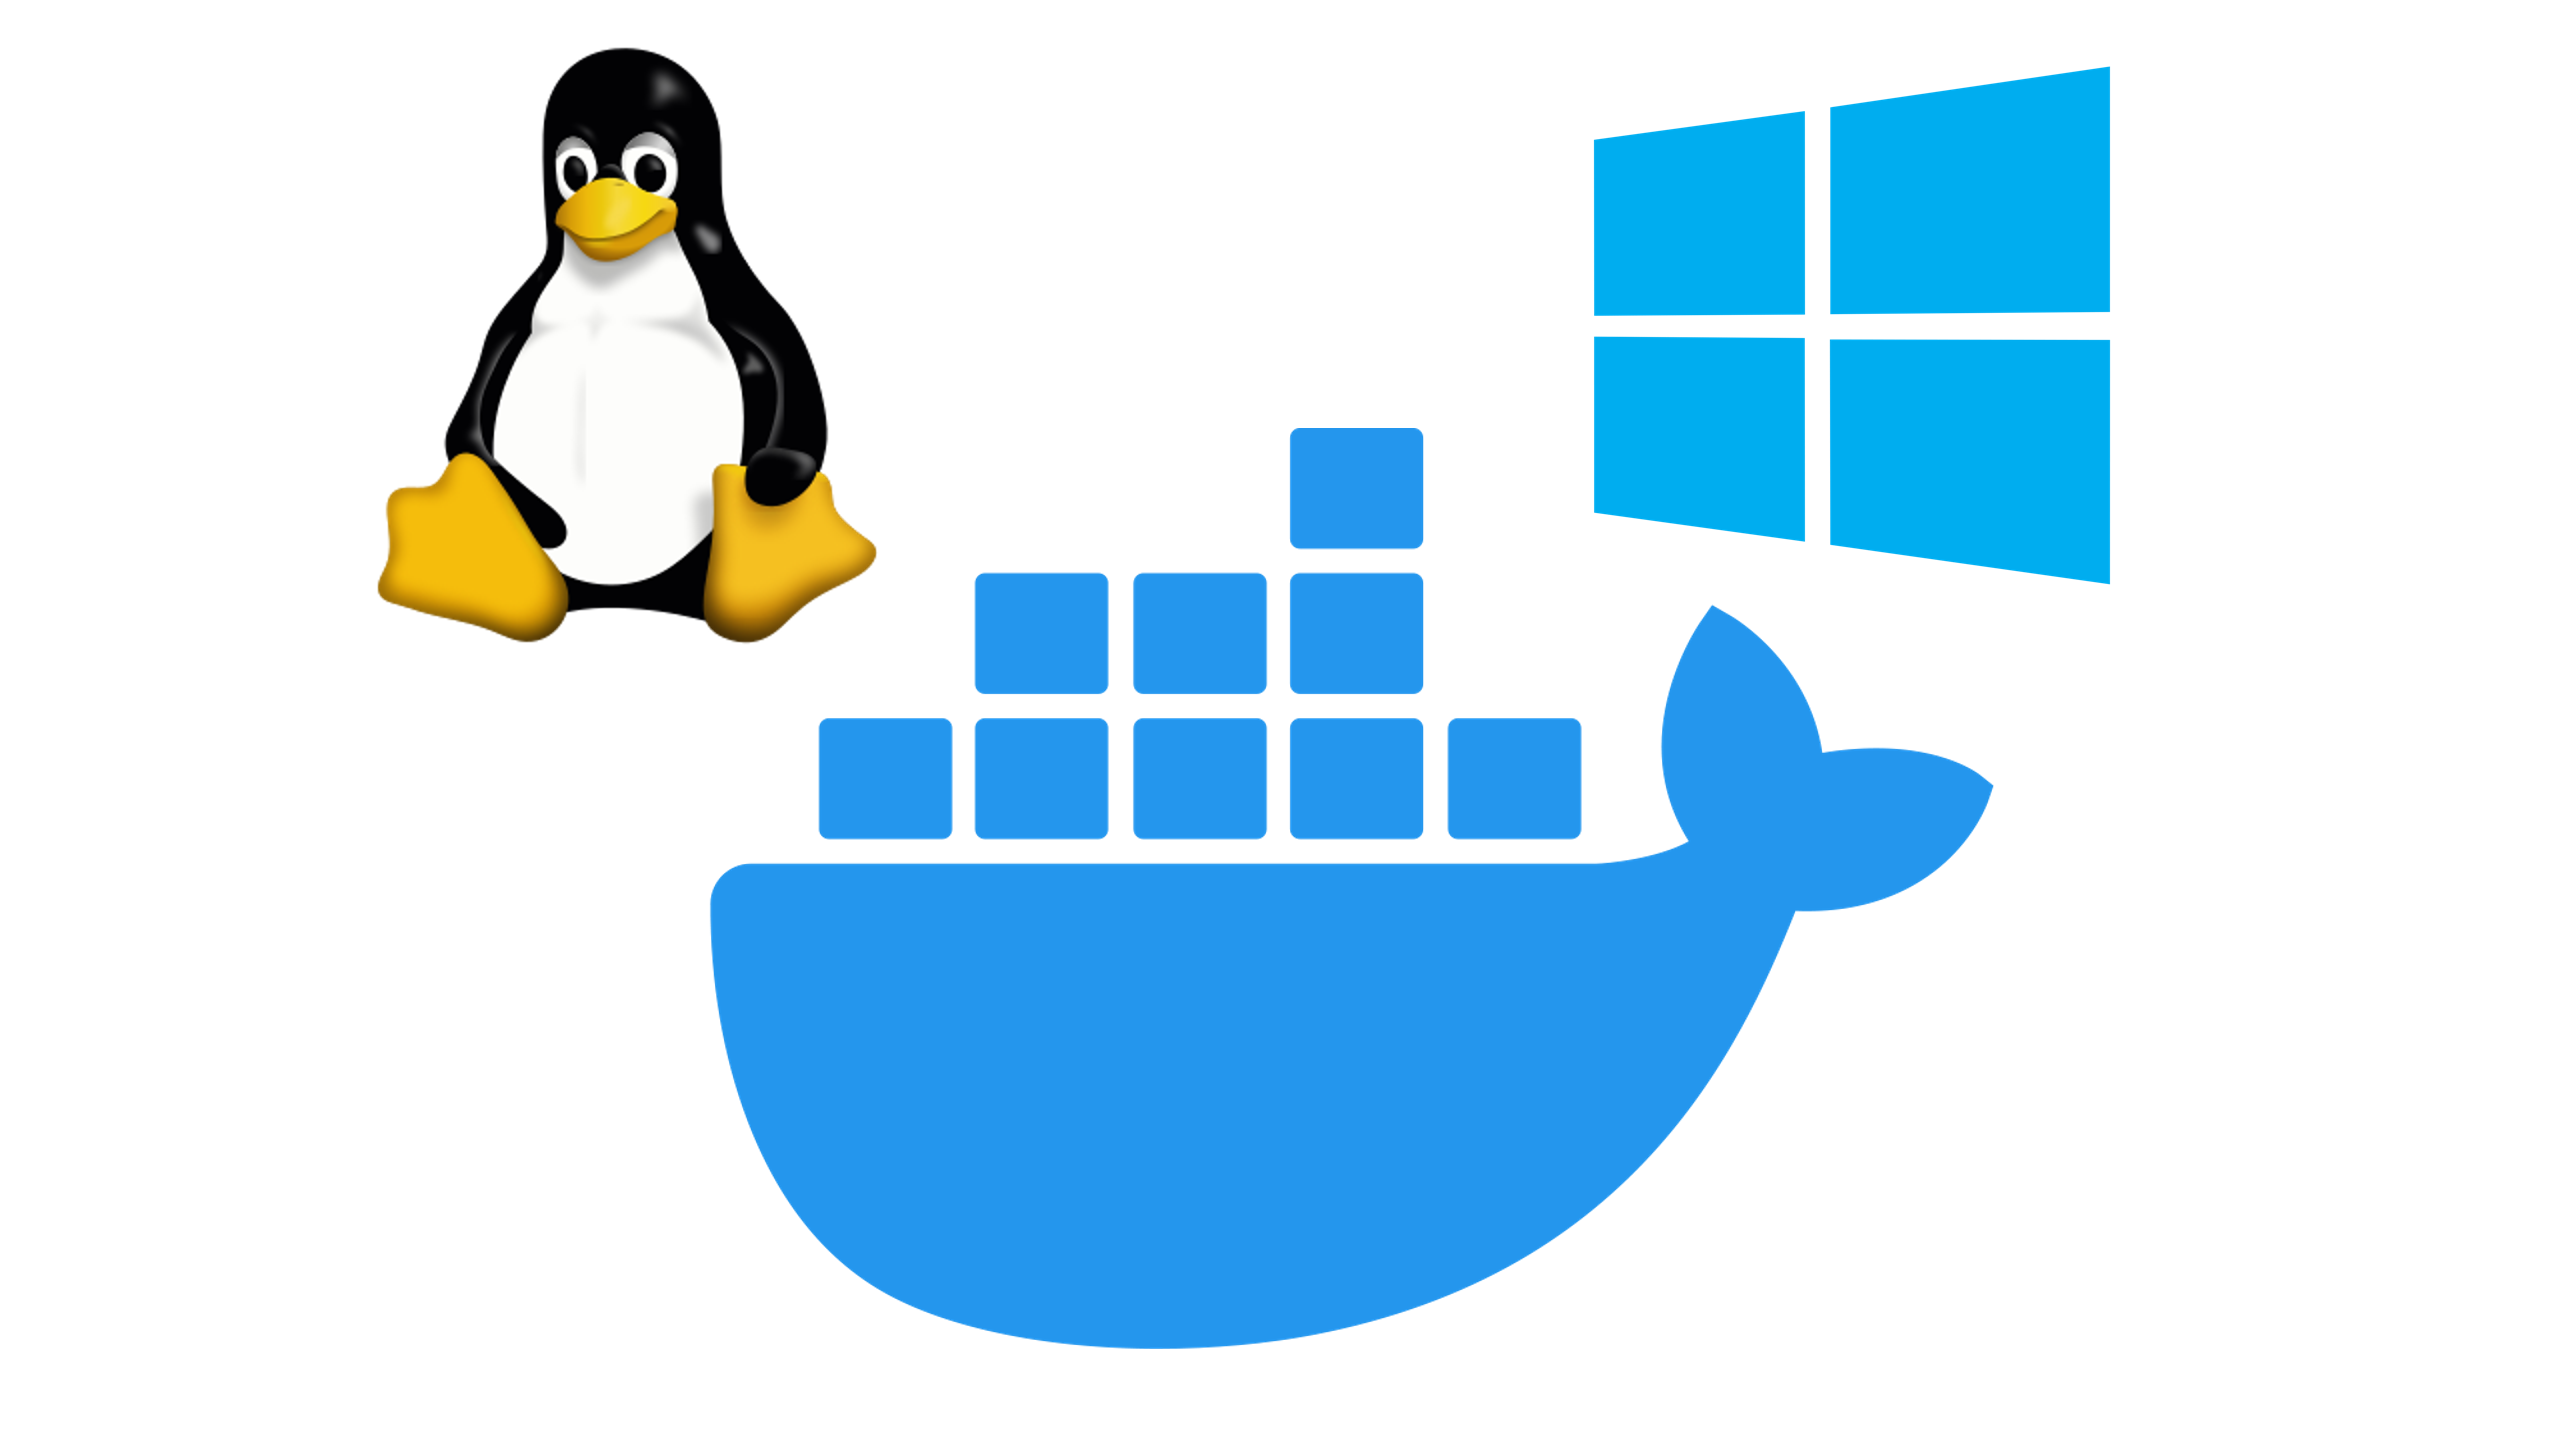 Running Linux and Windows containers at the same time on Windows 10